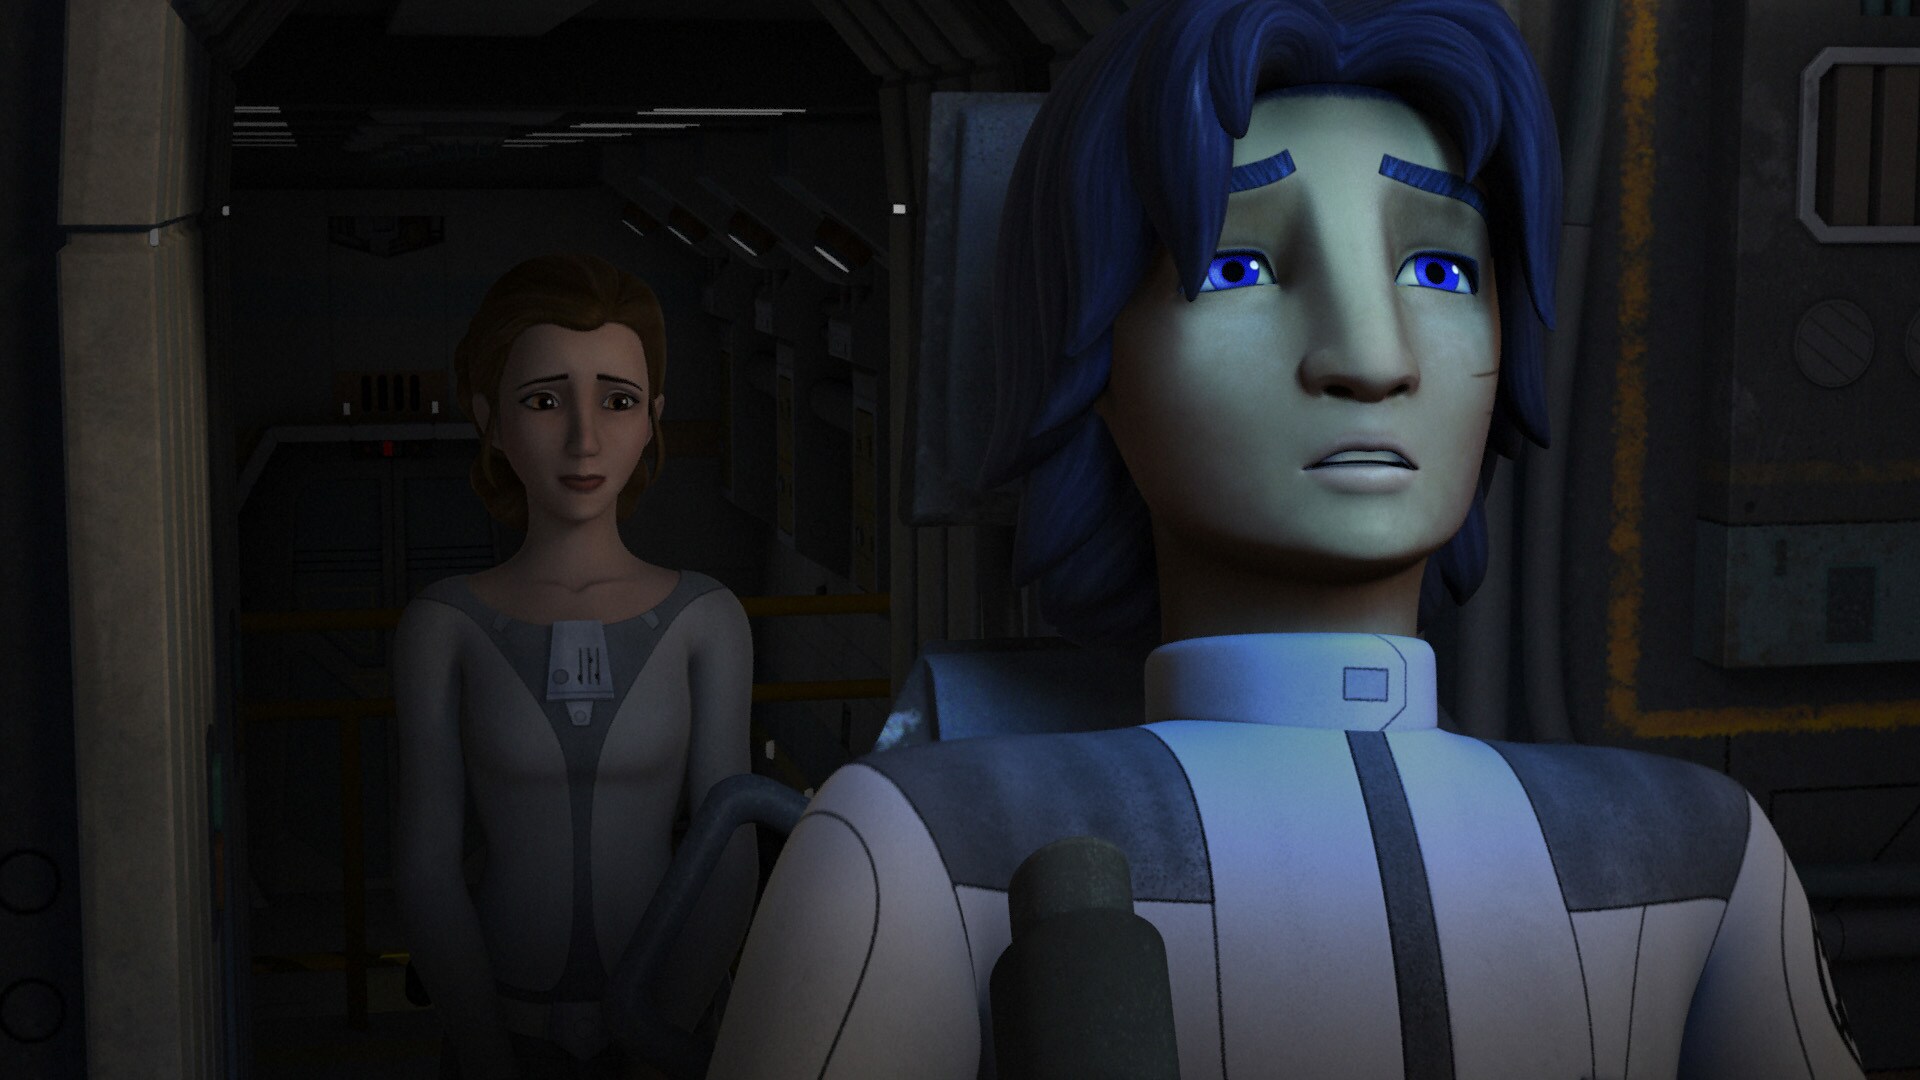 The Princess joins Ezra in one of the ship's gunners. Grieving, Ezra wonders if fighting is worth...